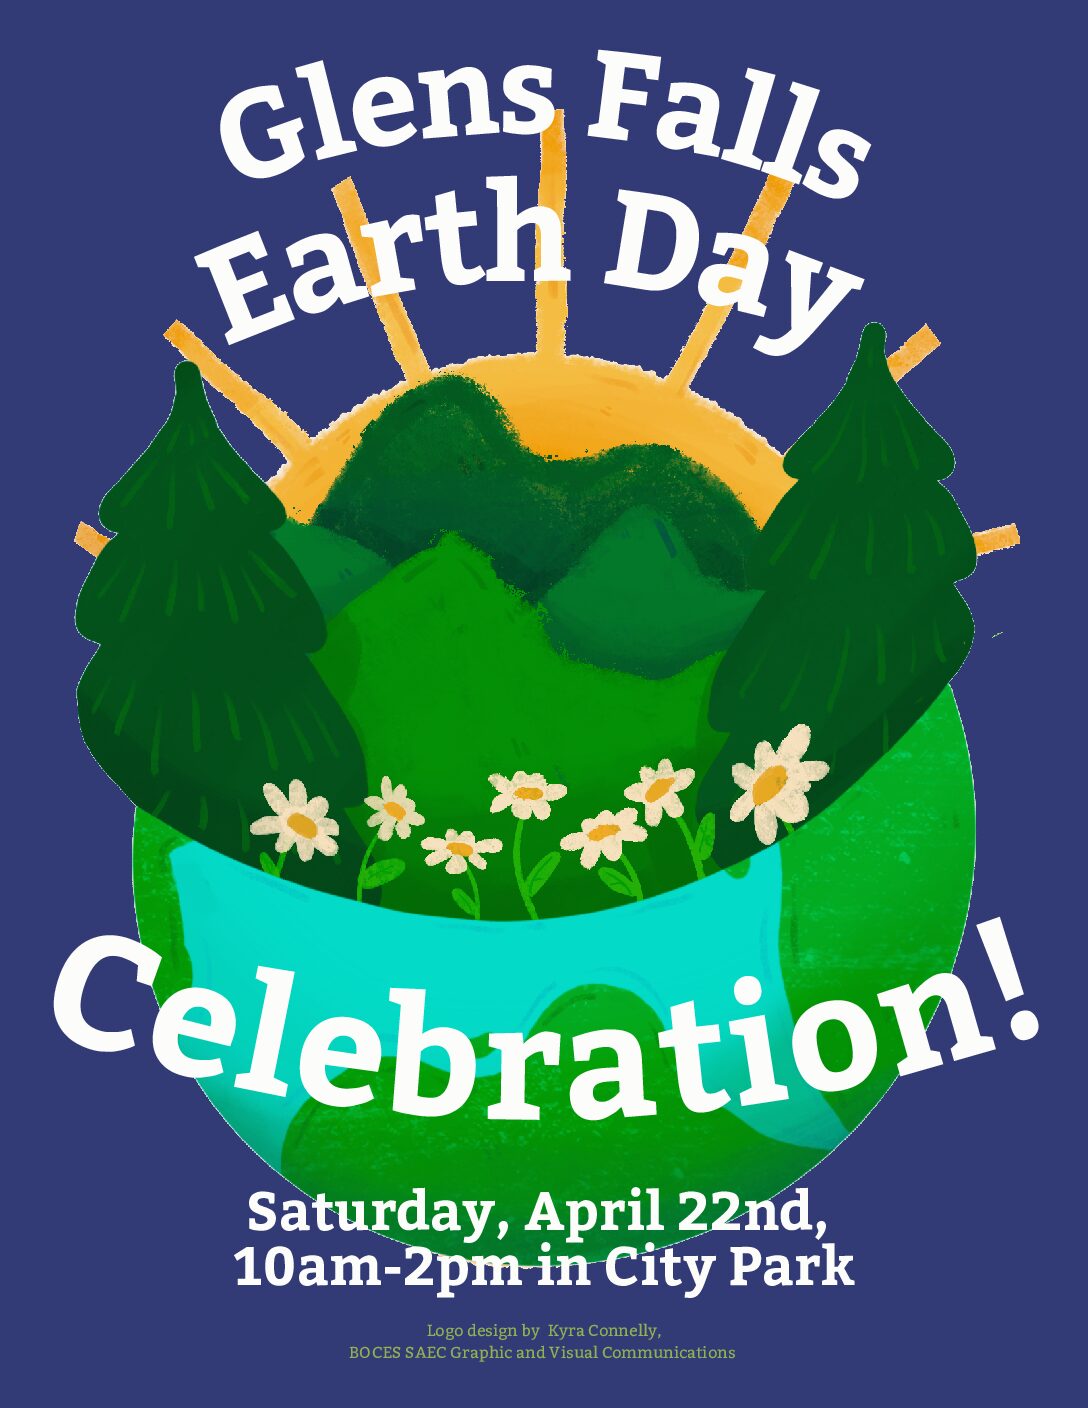 Earth Day events in Glens falls make people think about future